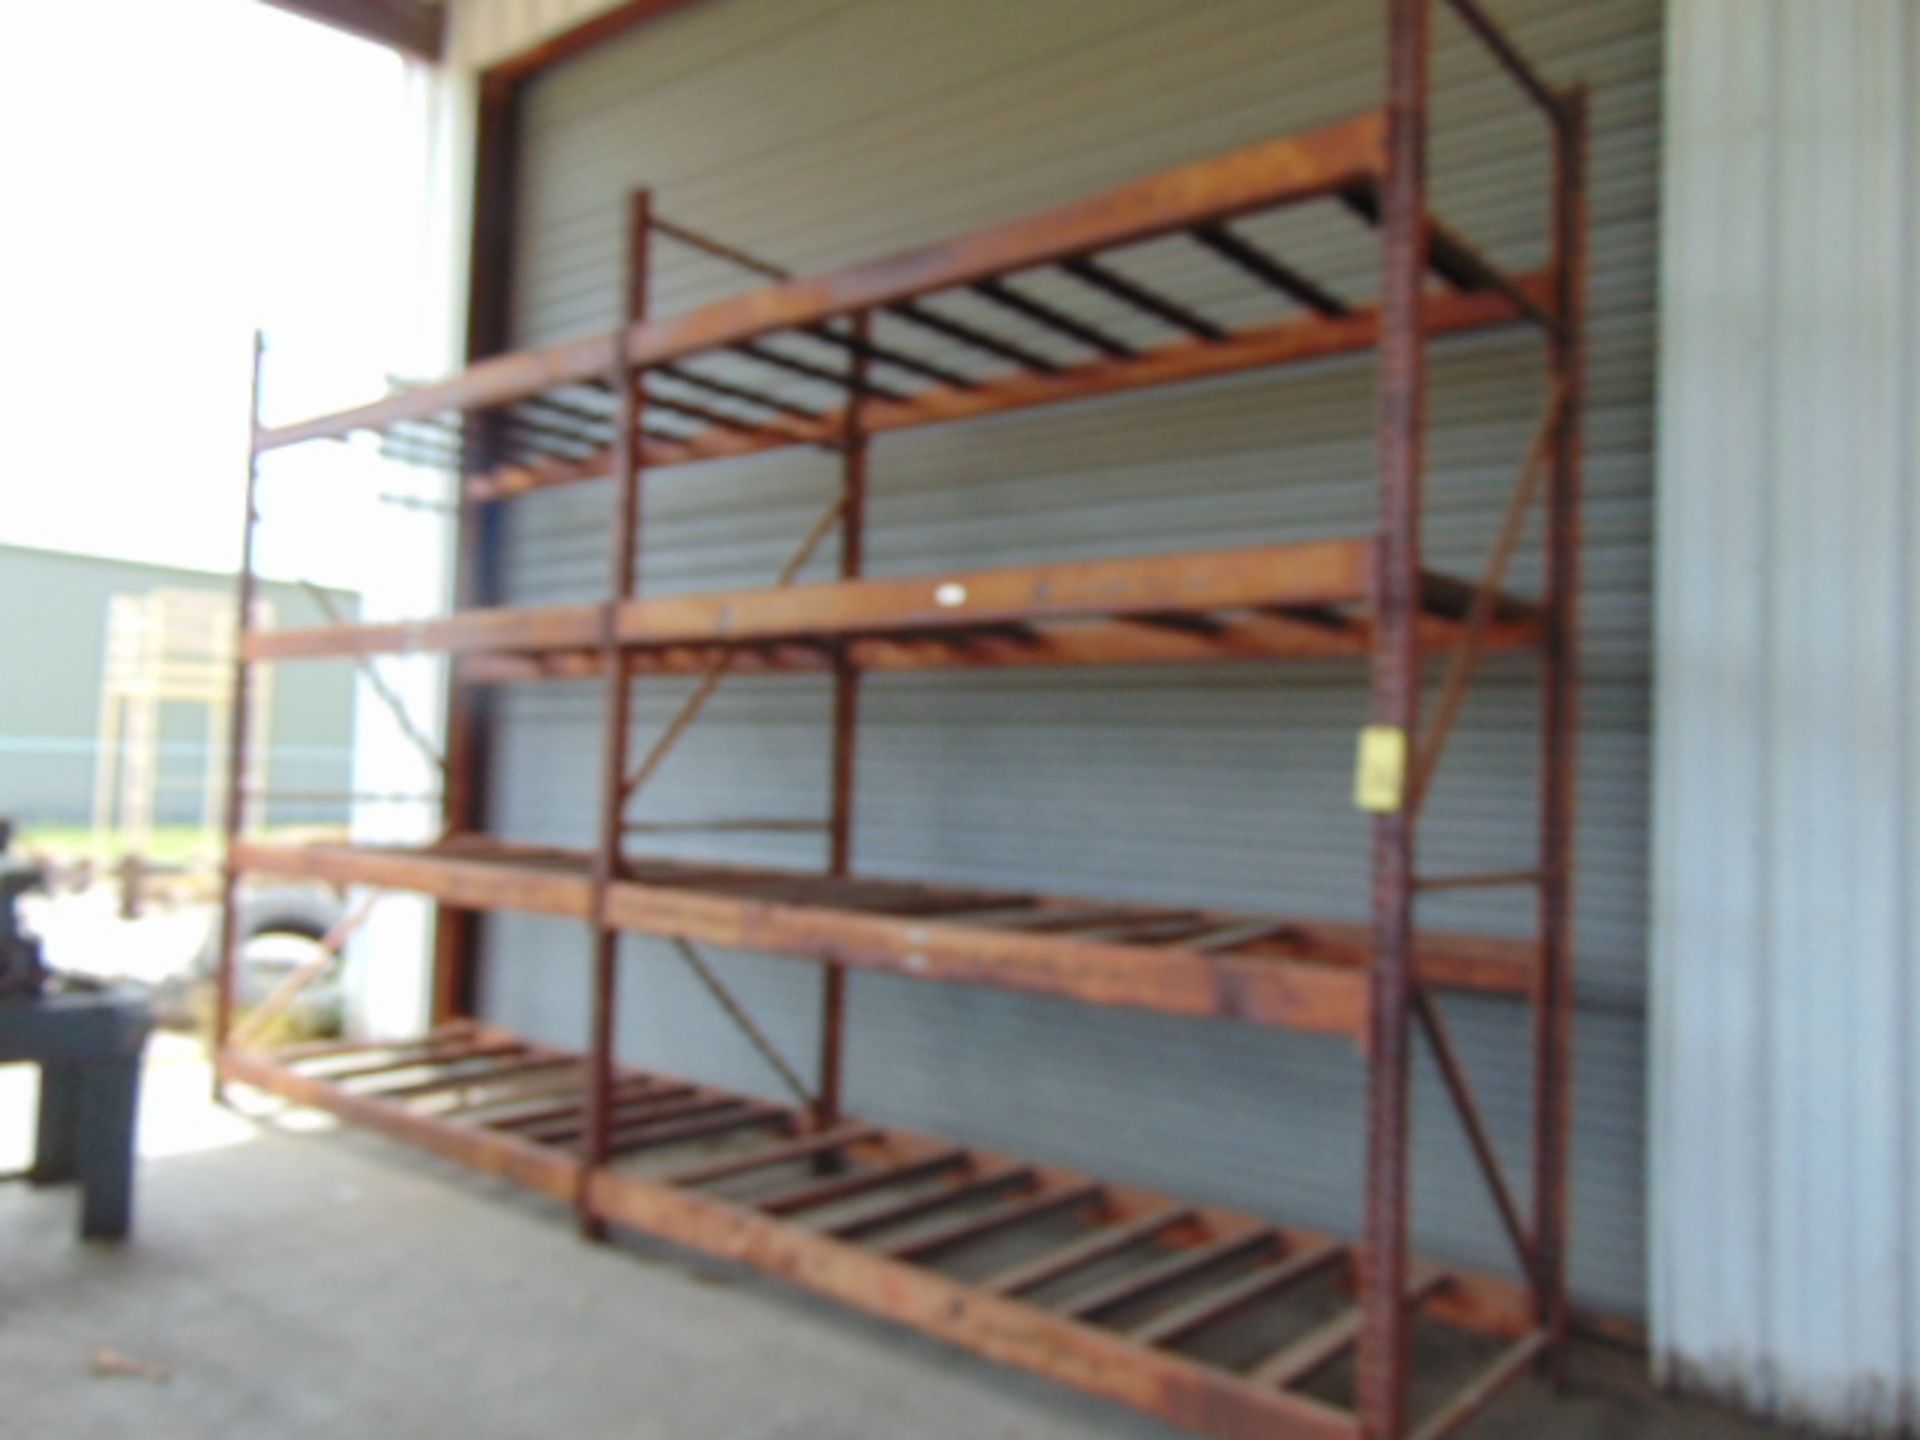 LOT OF PALLET RACKING SECTIONS (3), 12'ht. x 9'W. x 4'dp.